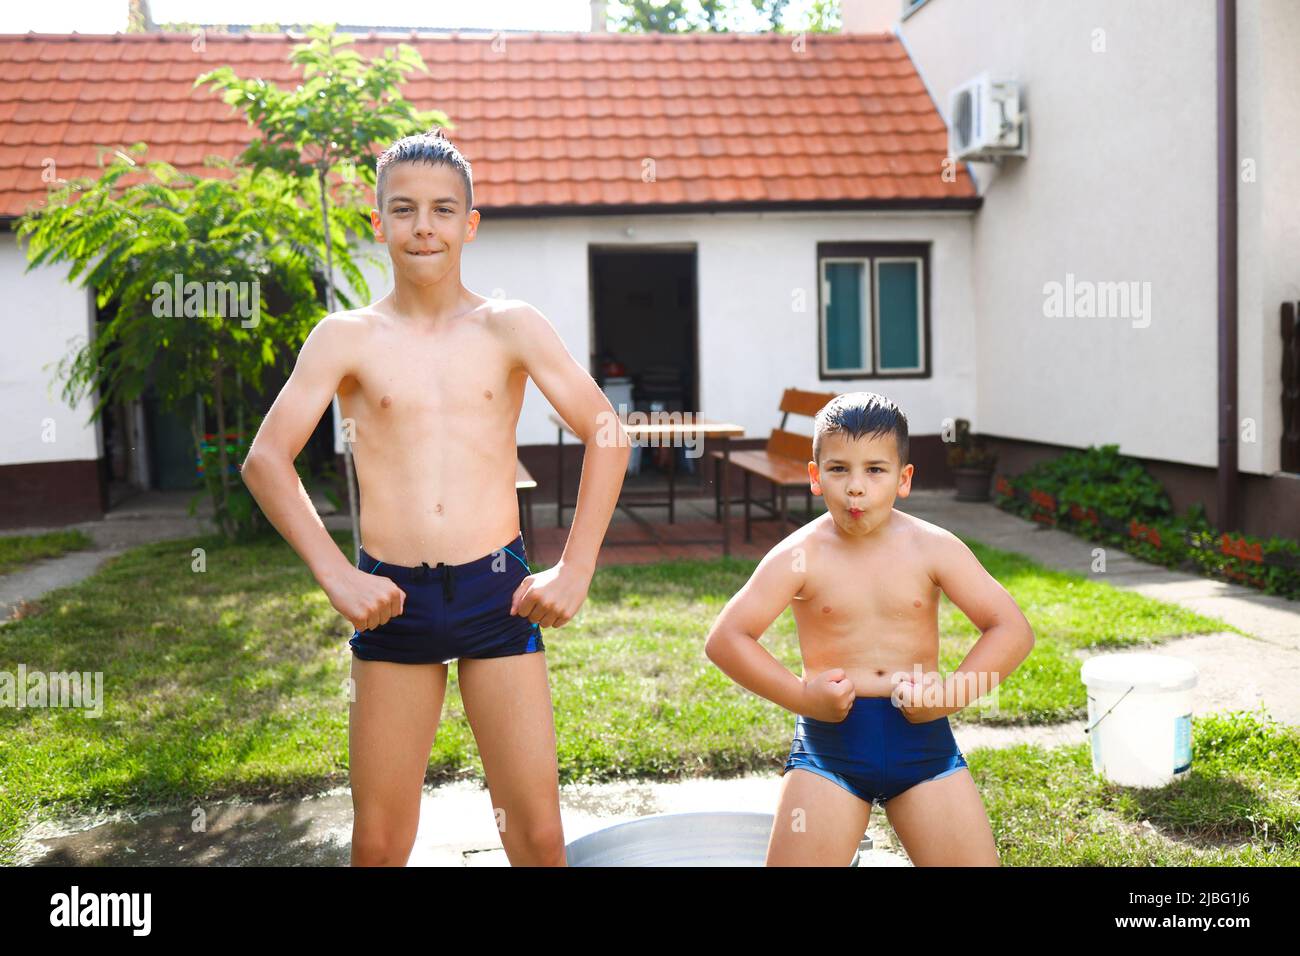 Two brothers goofing around and flexing muscles while playing with water during their summer break Stock Photo